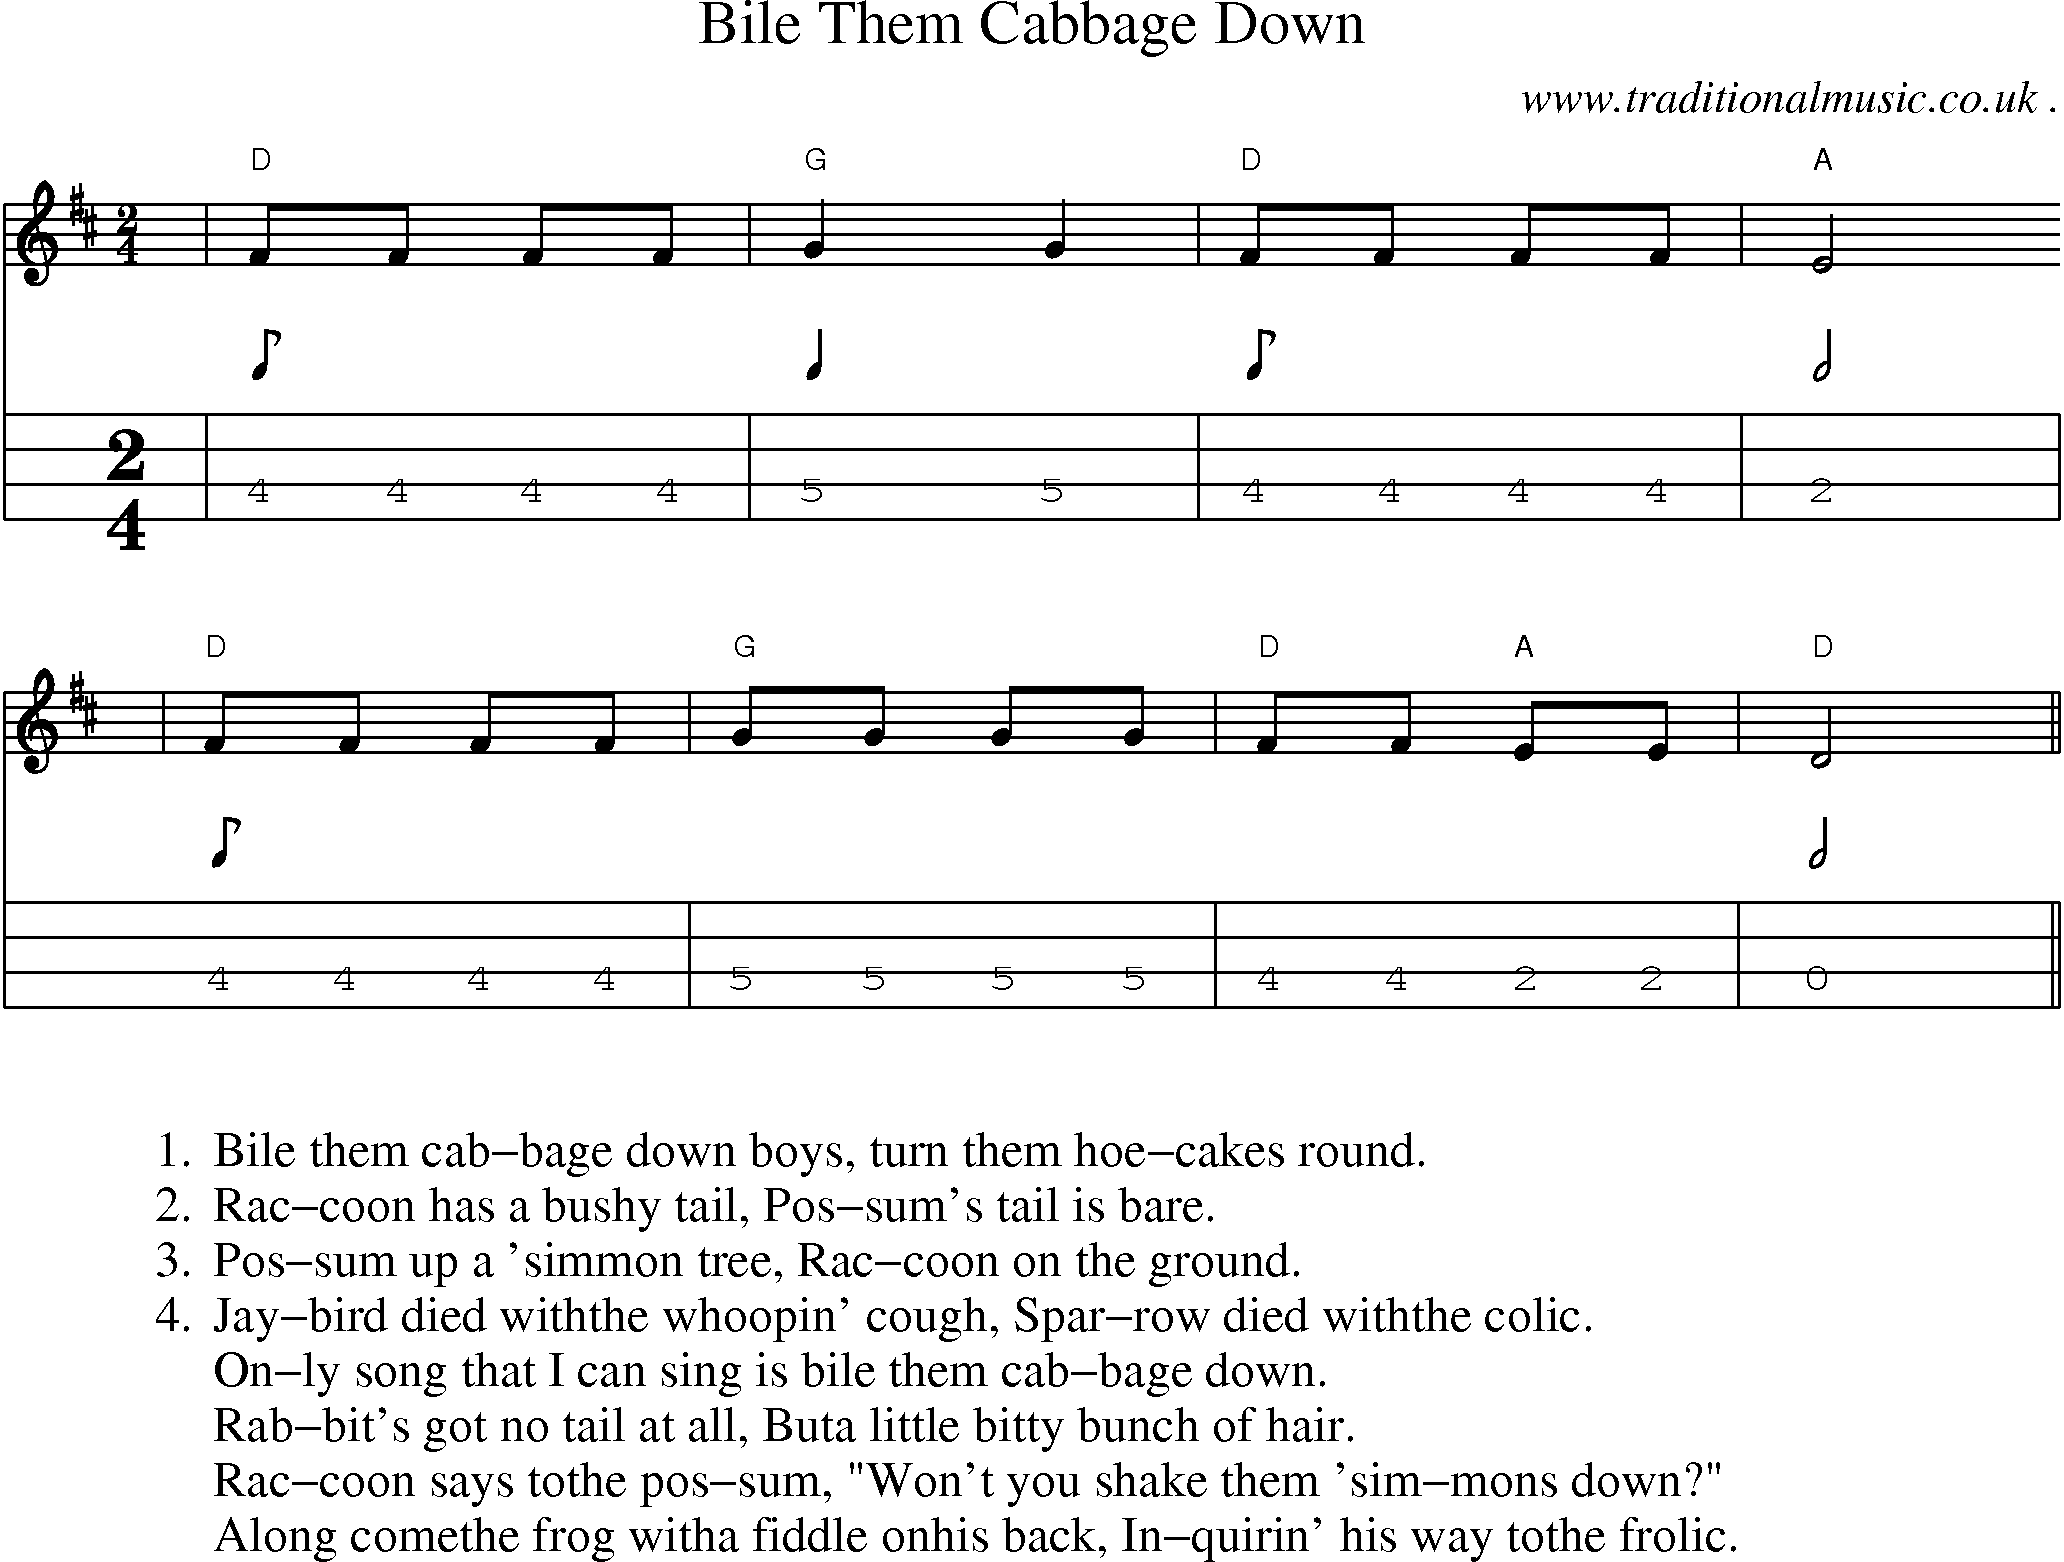 Music Score and Mandolin Tabs for Bile Them Cabbage Down